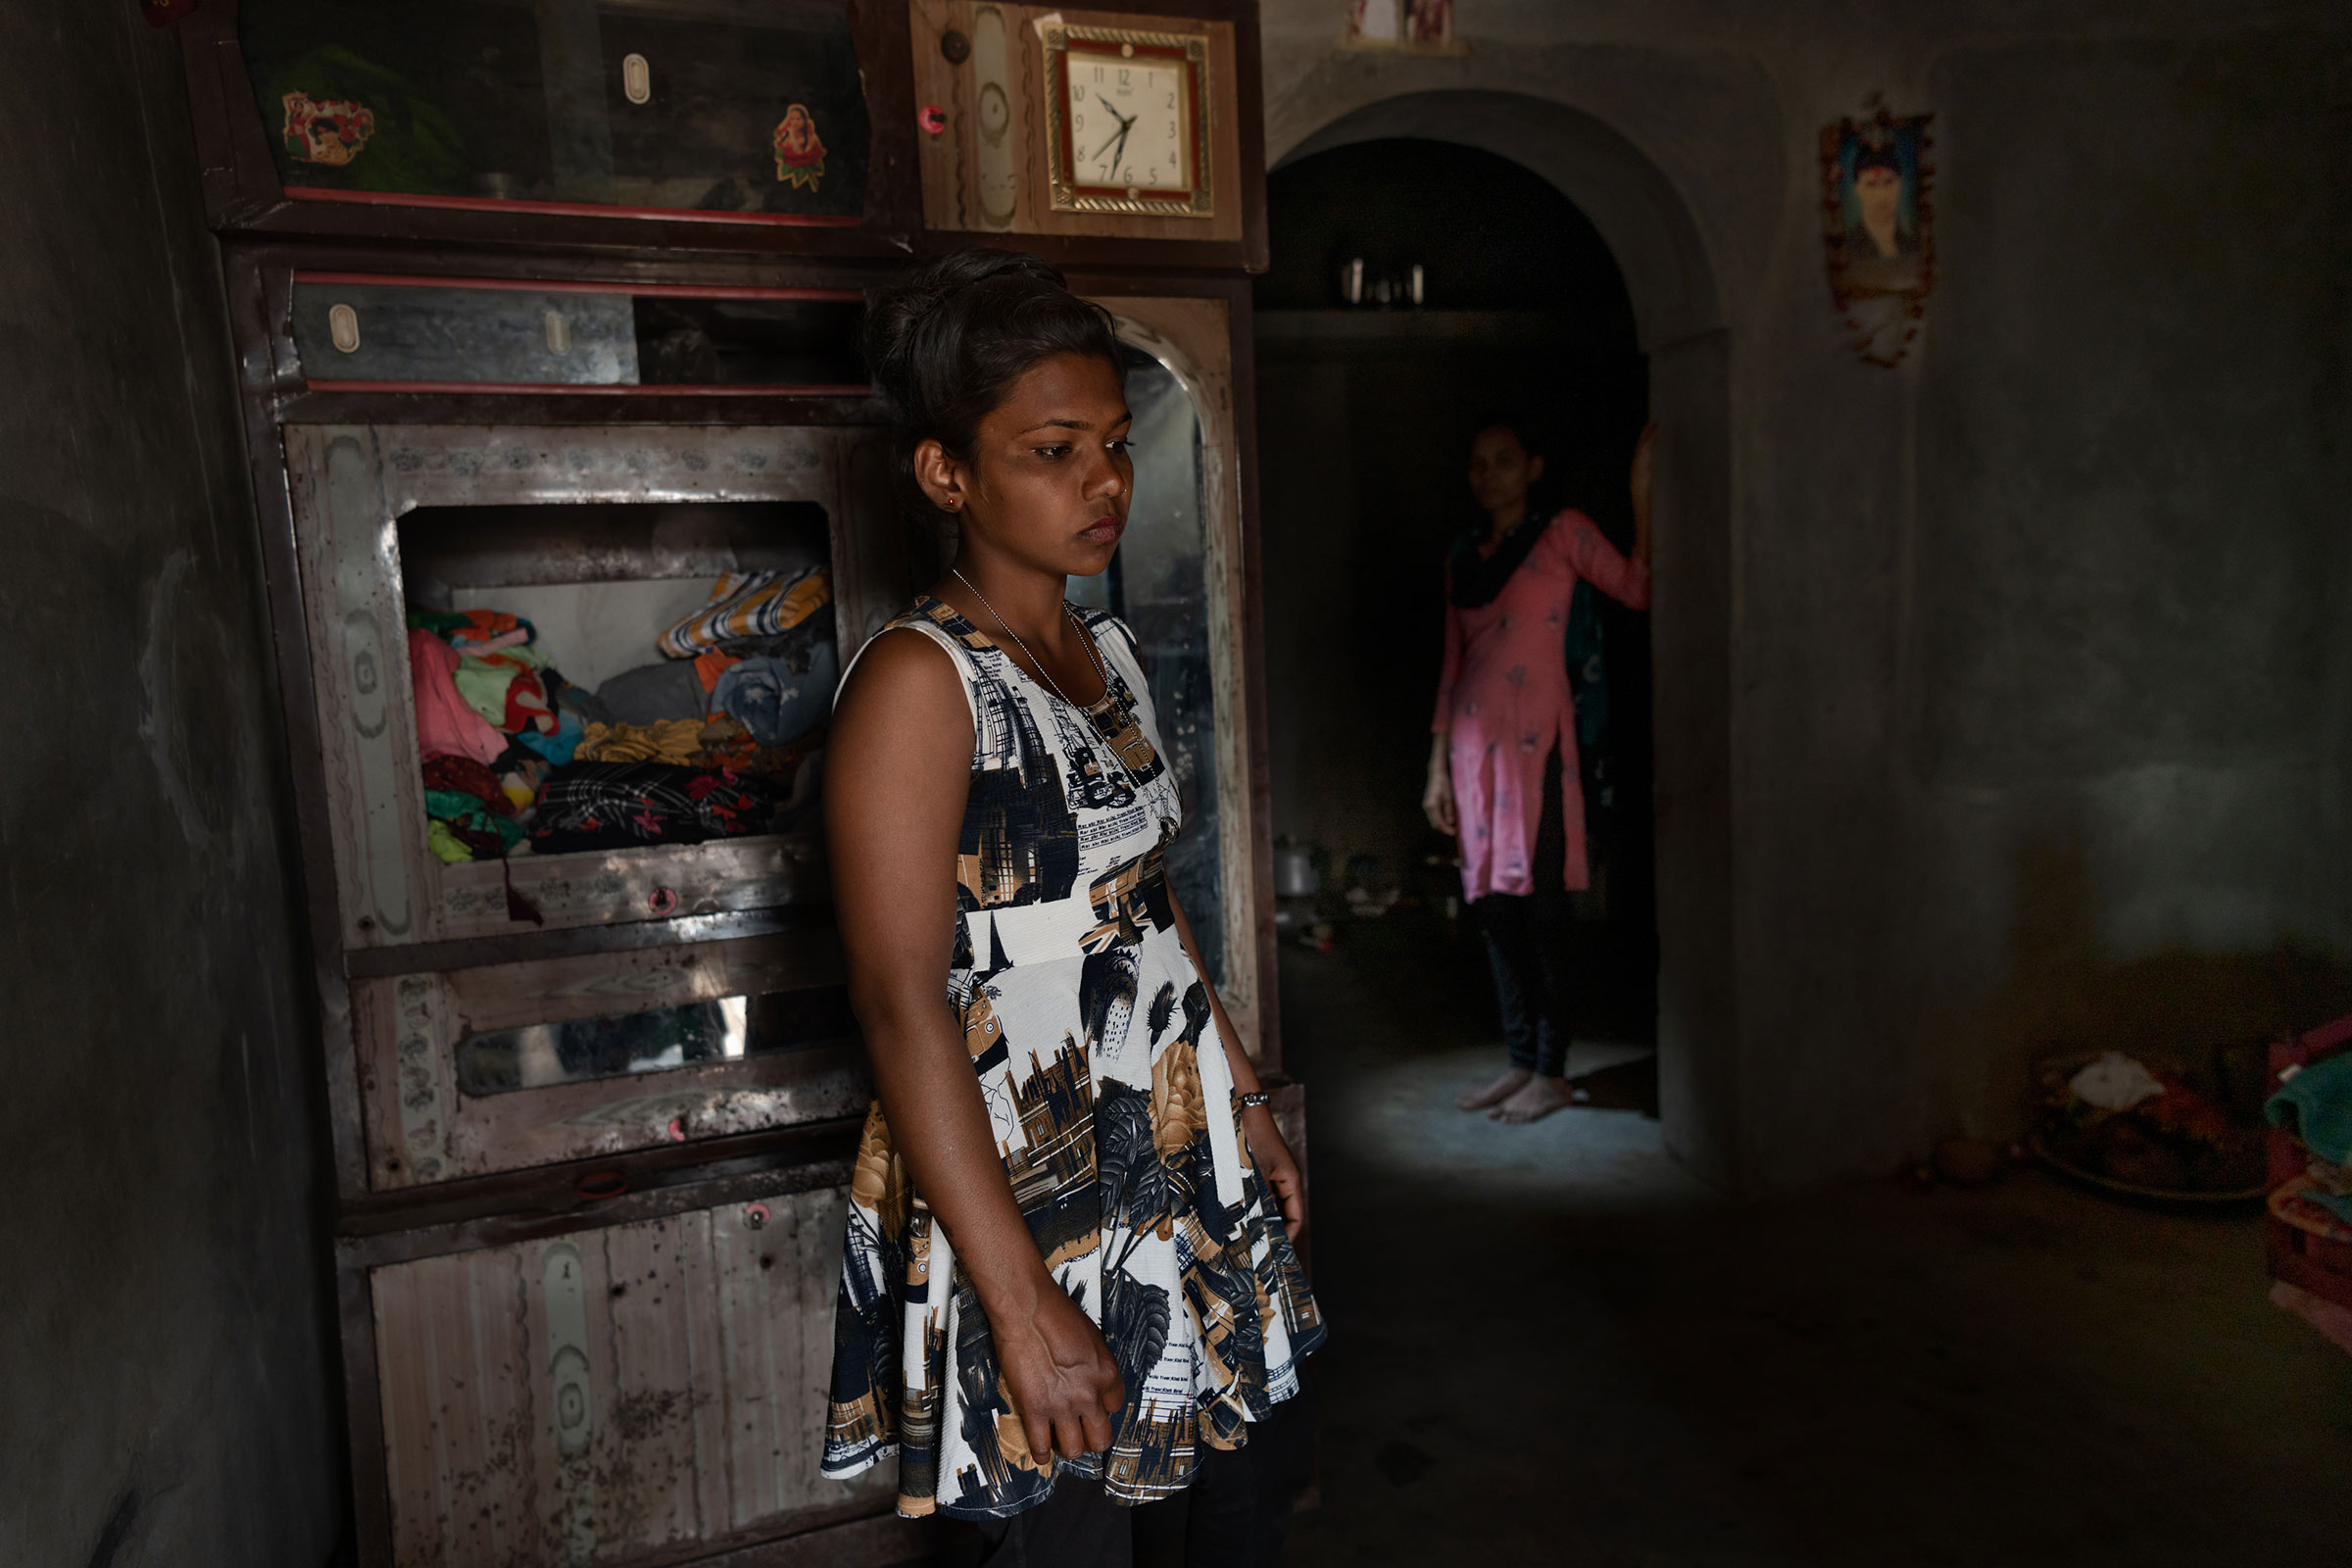 Savitri Vasava, 23, lives in Dakor, Gujarat, India, and is the mother of a 3-year-old. In February, she said she planned to become a surrogate after seeing her sister-in-law build a house from the money she made from surrogacy.